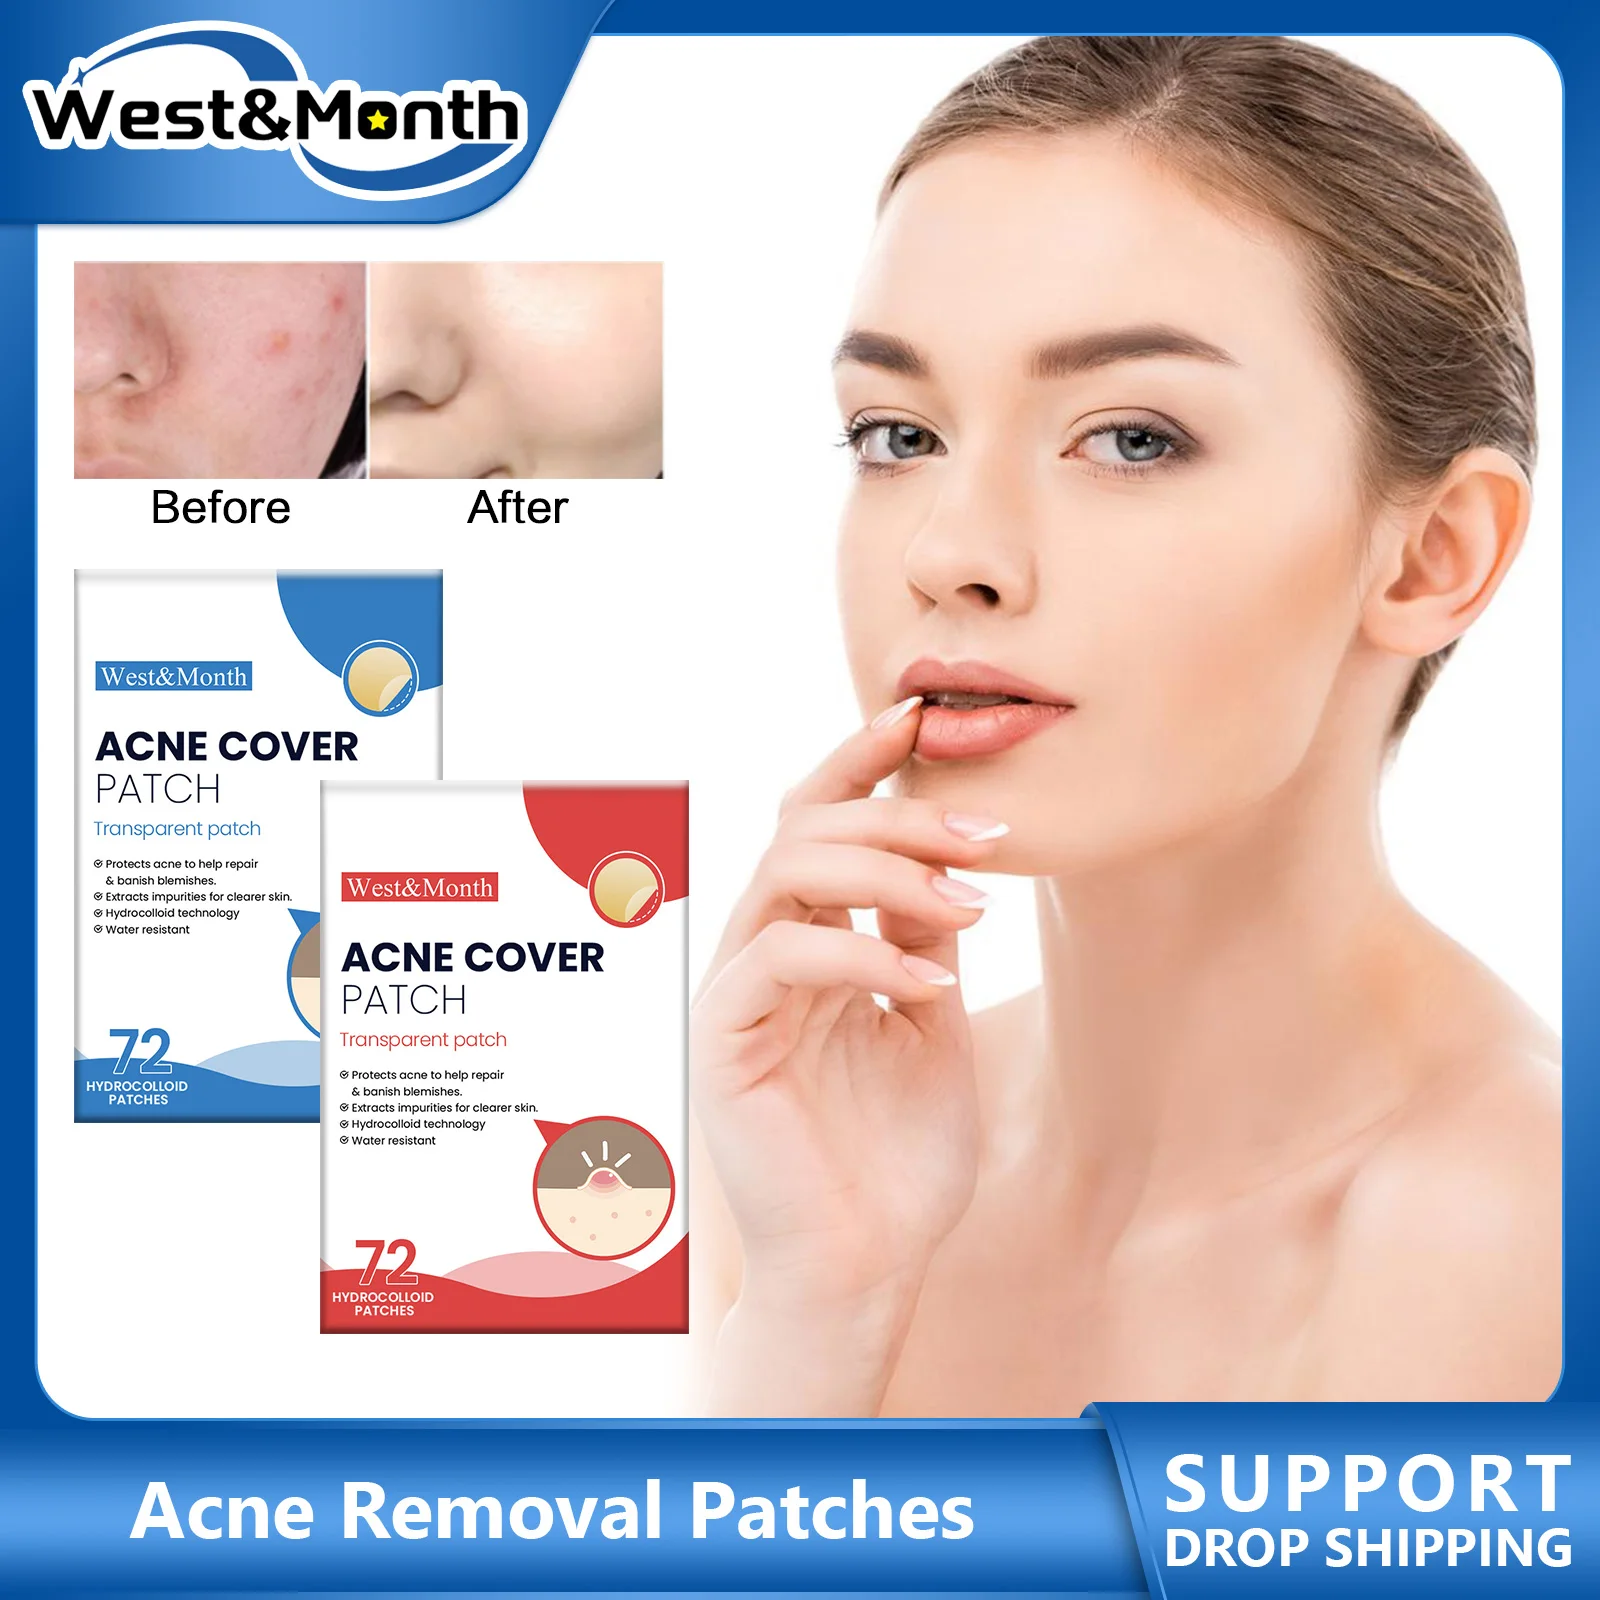 Invisible Acne Patches Spots Cover Blemish Treatment Soothing Concealer Waterproof Hydrocolloid Healing Pimples Removal Sticker go 011 iw pressure maintaining mold for apple watch s1 s2 s3 s4 s5 s6 s7 s8 lcd screen back cover removal iw frame holder tools